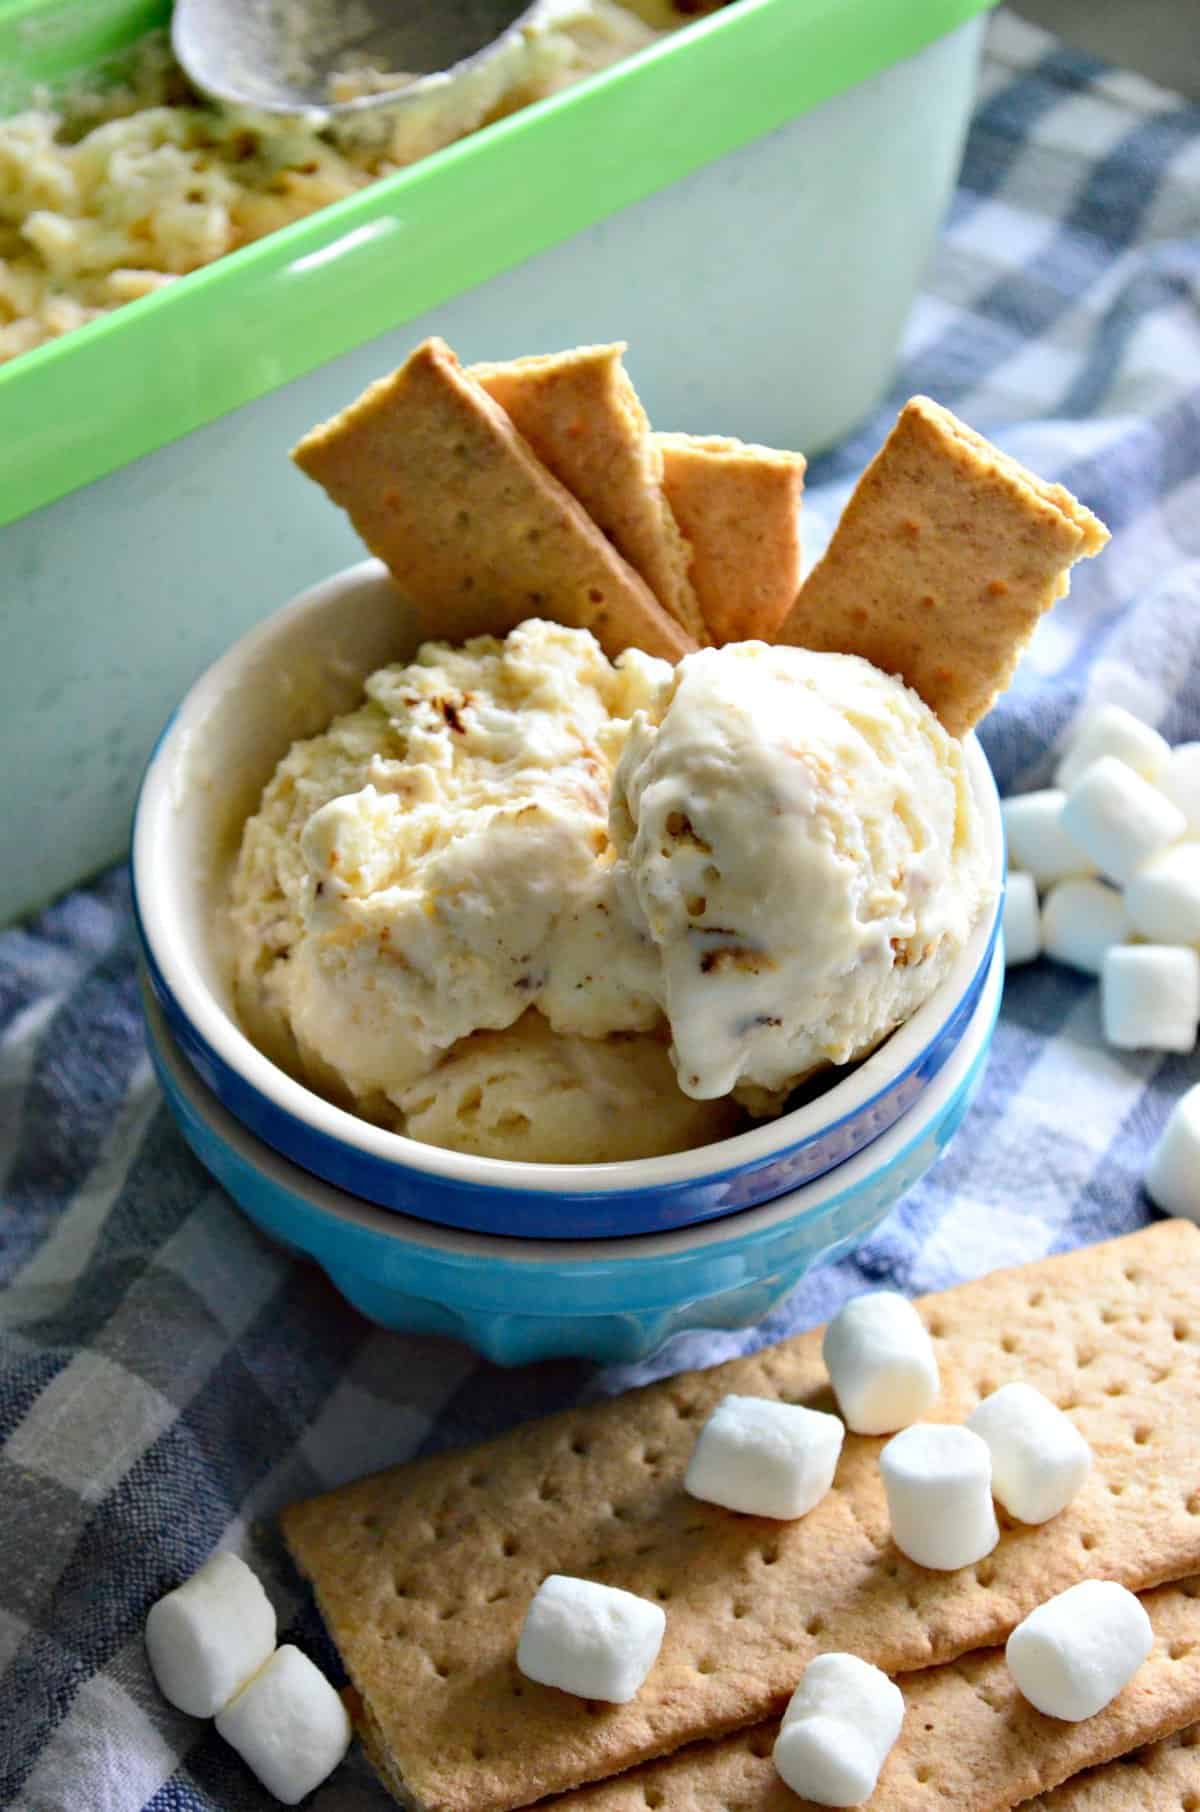 bowl of creamy colored chunky ice cream with graham crackers next to mini marshmallows.